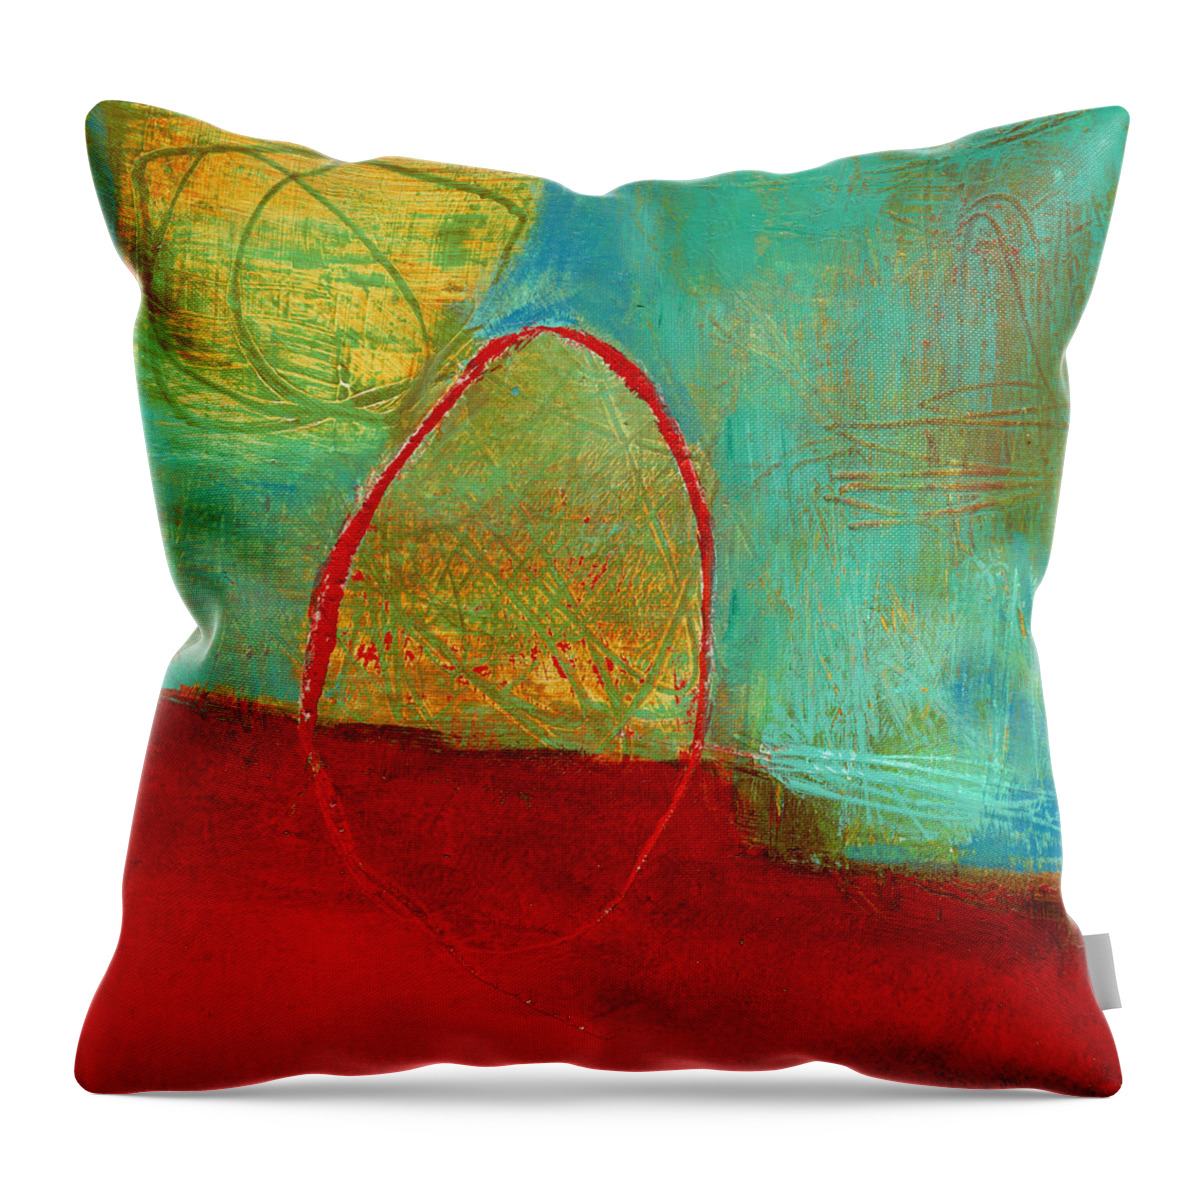 4x4 Throw Pillow featuring the painting Teeny Tiny Art 115 by Jane Davies